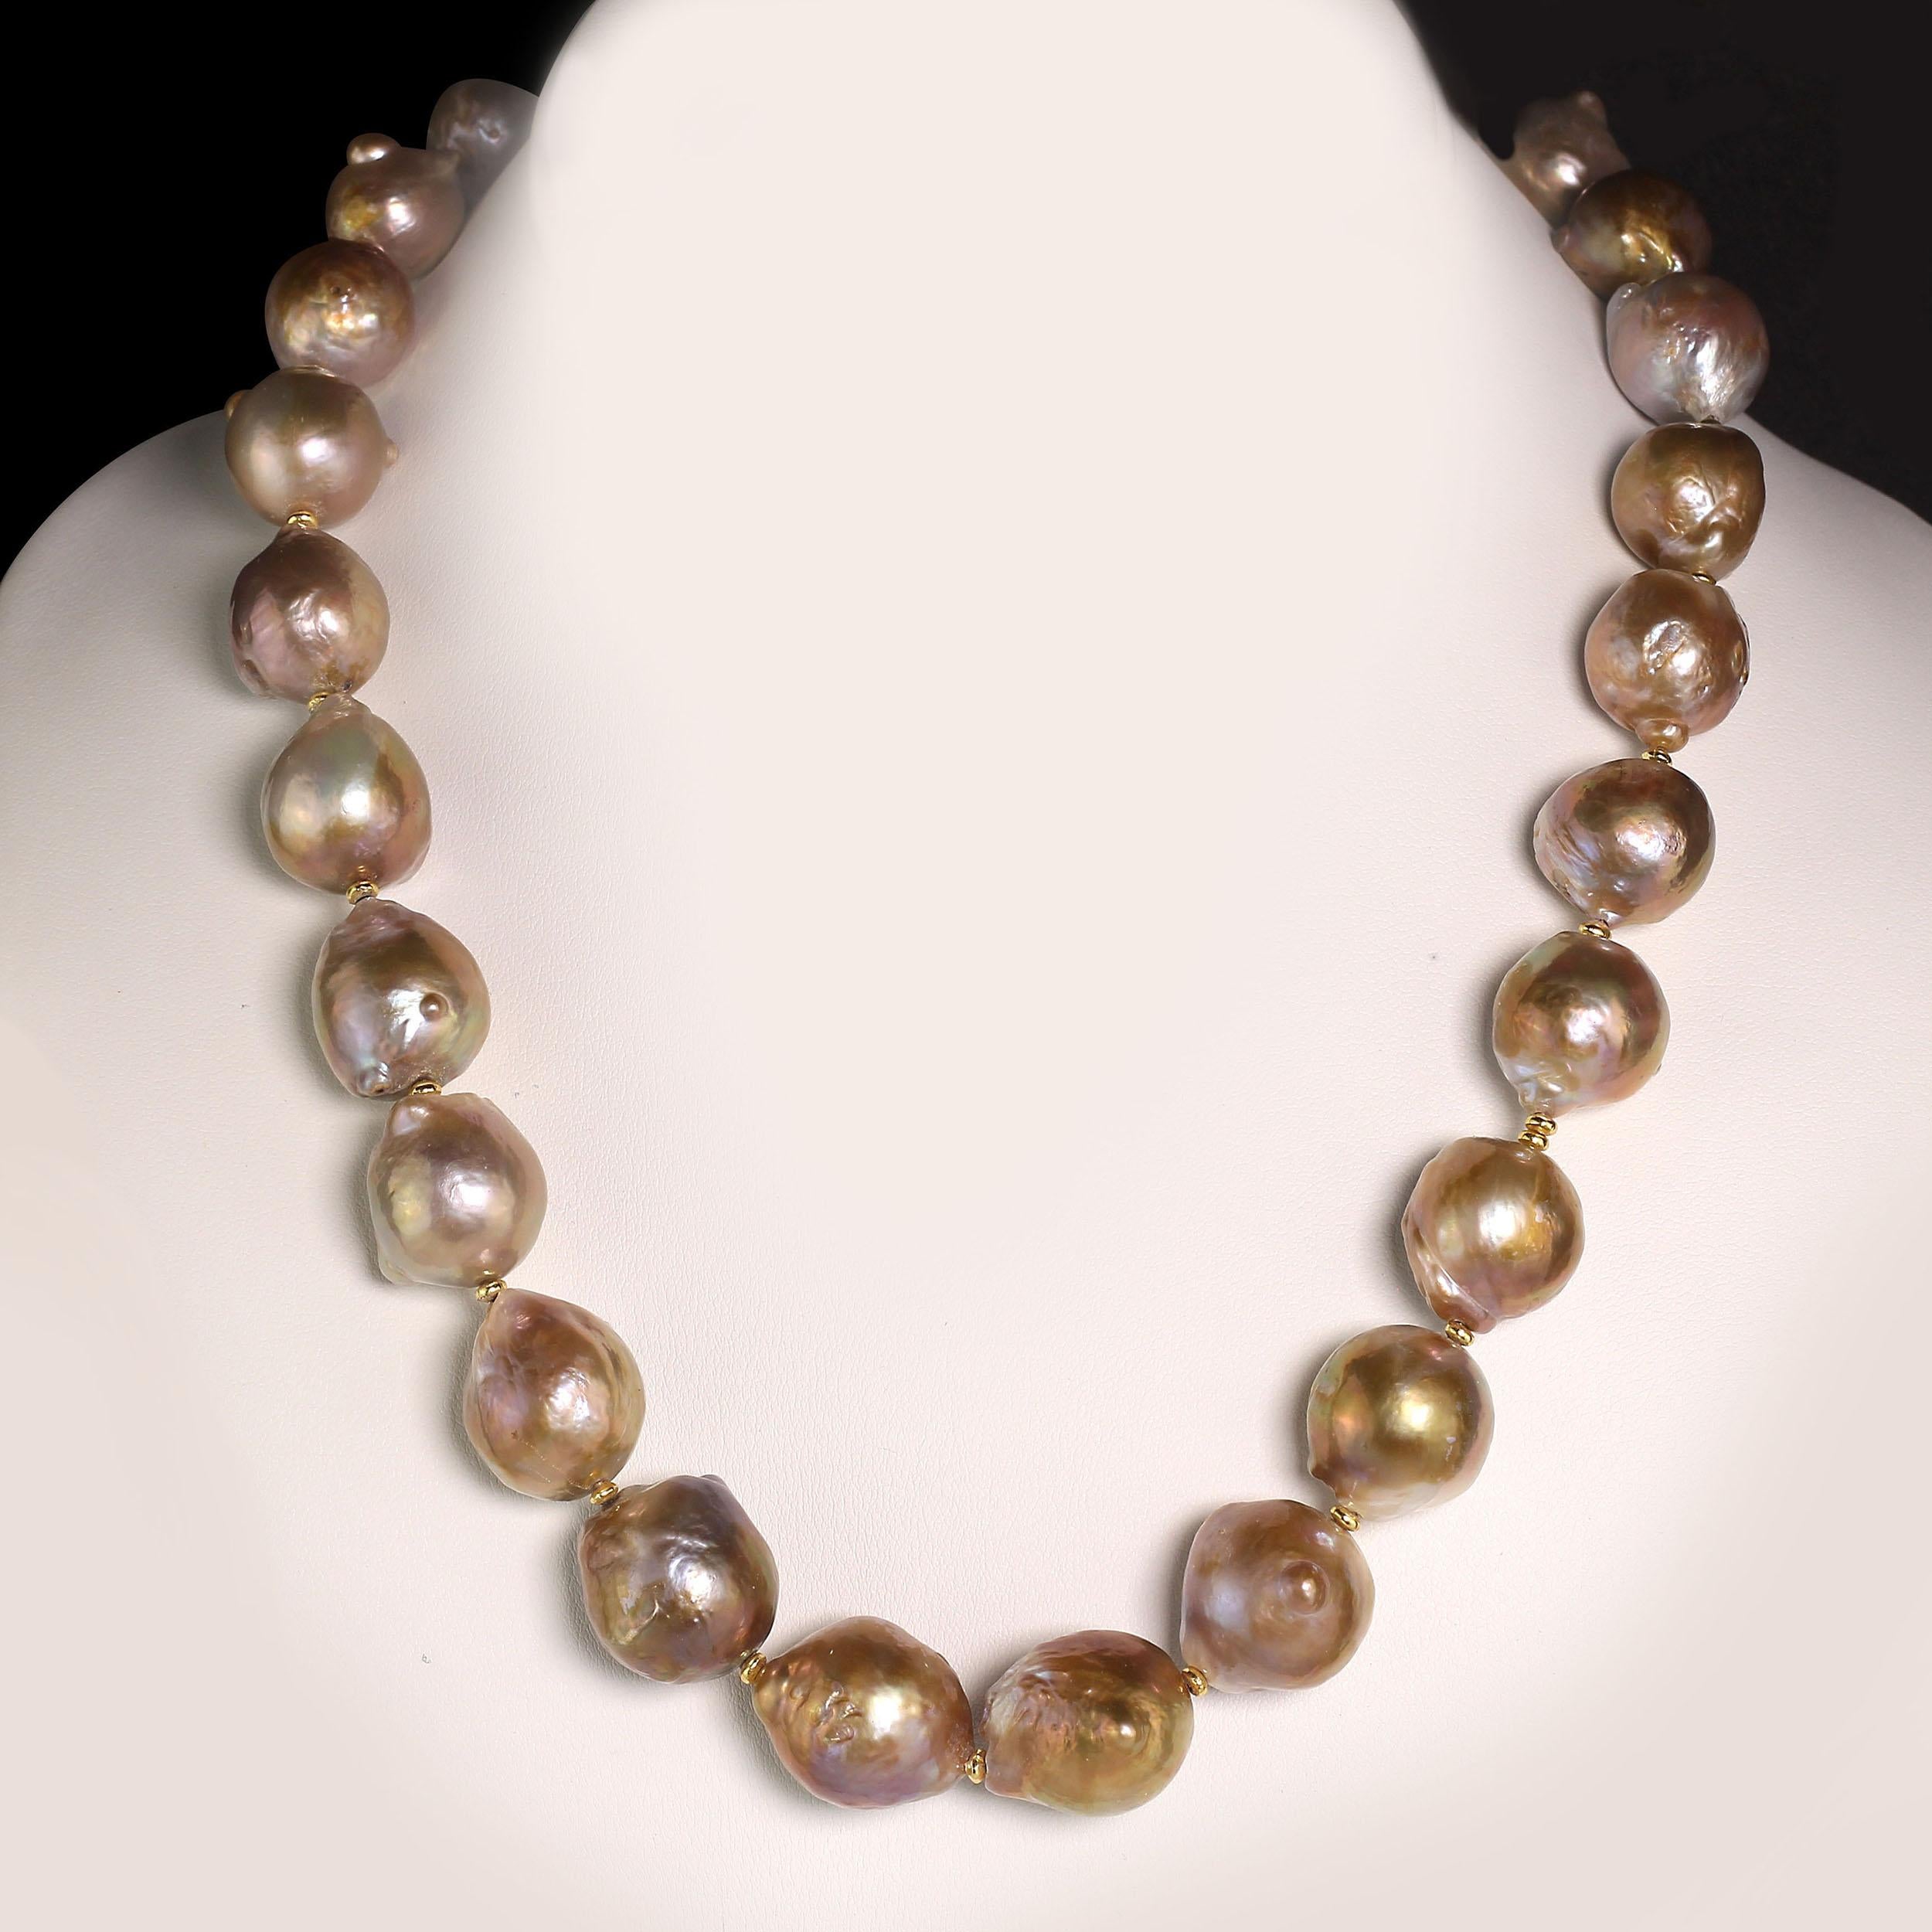 Glamorous Iridescent Wrinkle Pearl Necklace from Gemjunky 7